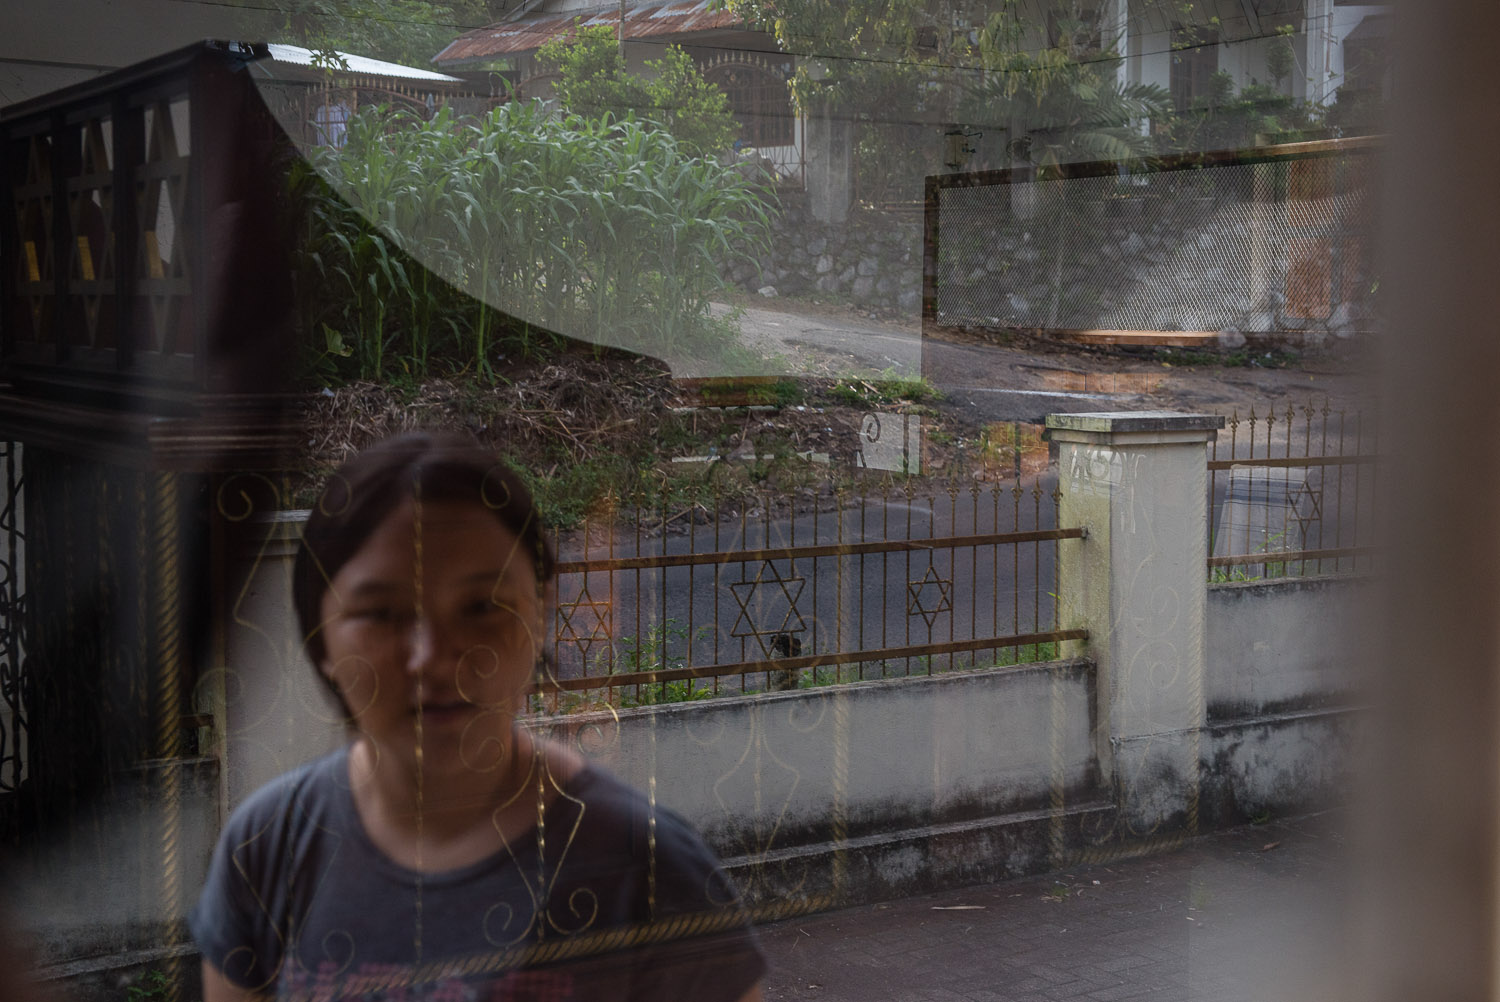   Ezra's daughter's face is reflected in the window of the locked synagogue in Manado. While Ezra's family came to pray at Vicky's home synagogue, Ezra is still somewhat affiliated with another group in Manado (with supposed links to the church) and 